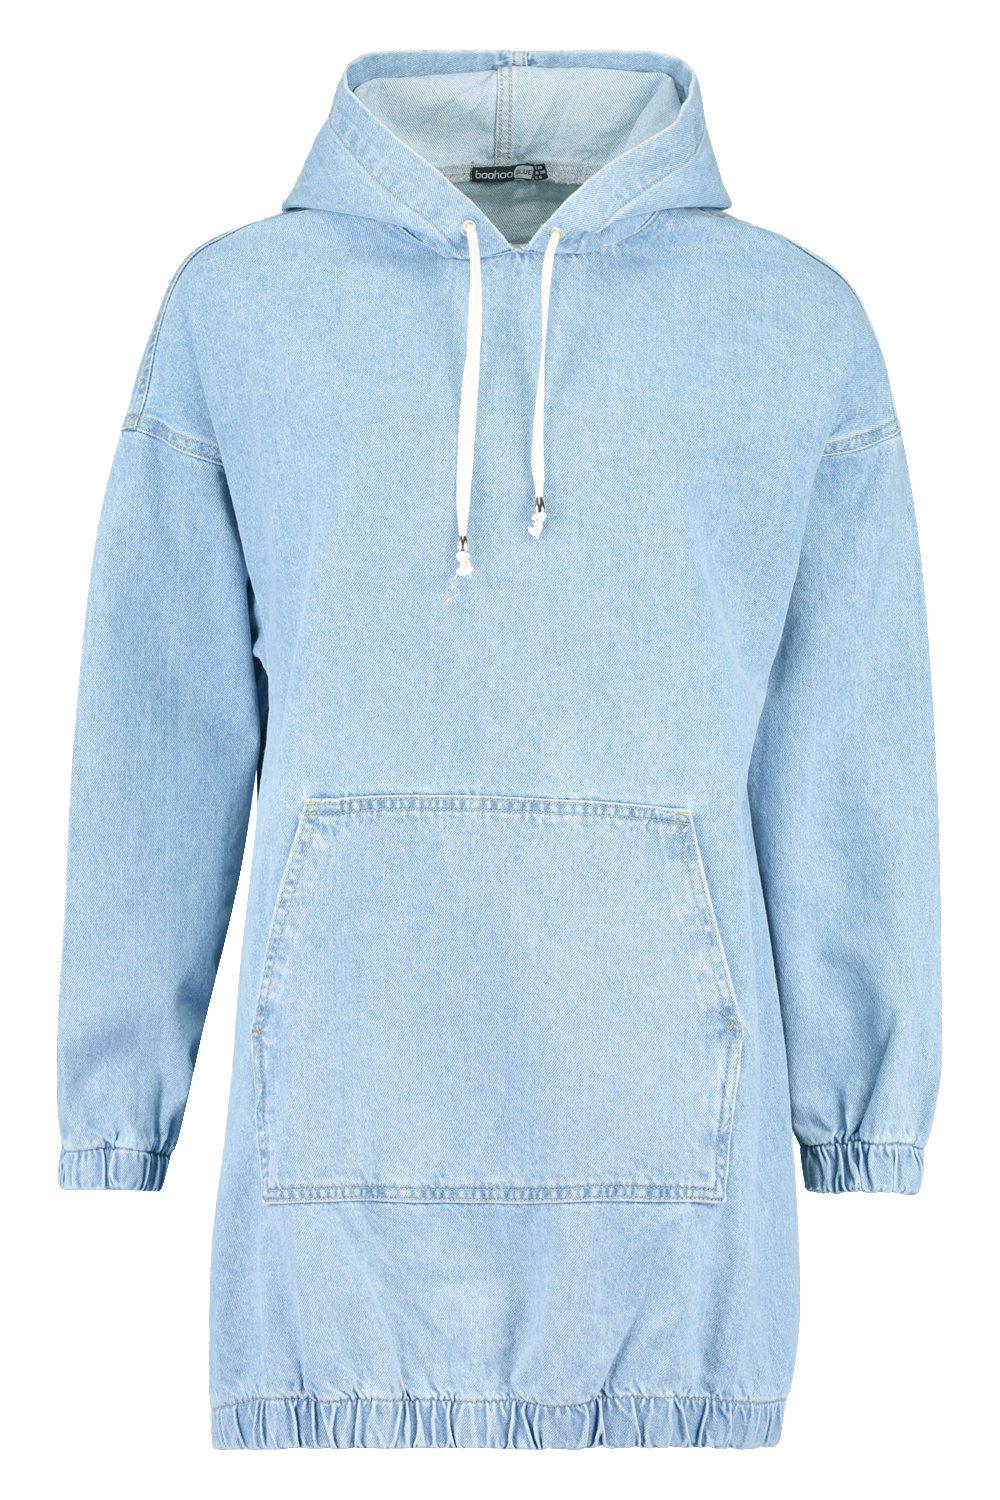 ZDRZK lightning deals today jackets for women Long Sleeve Hoodies For Women  Dress Casual Fashion Boho Floral Print Pullover Tops Drawstring Hooded  Sweatshirt Blue XL